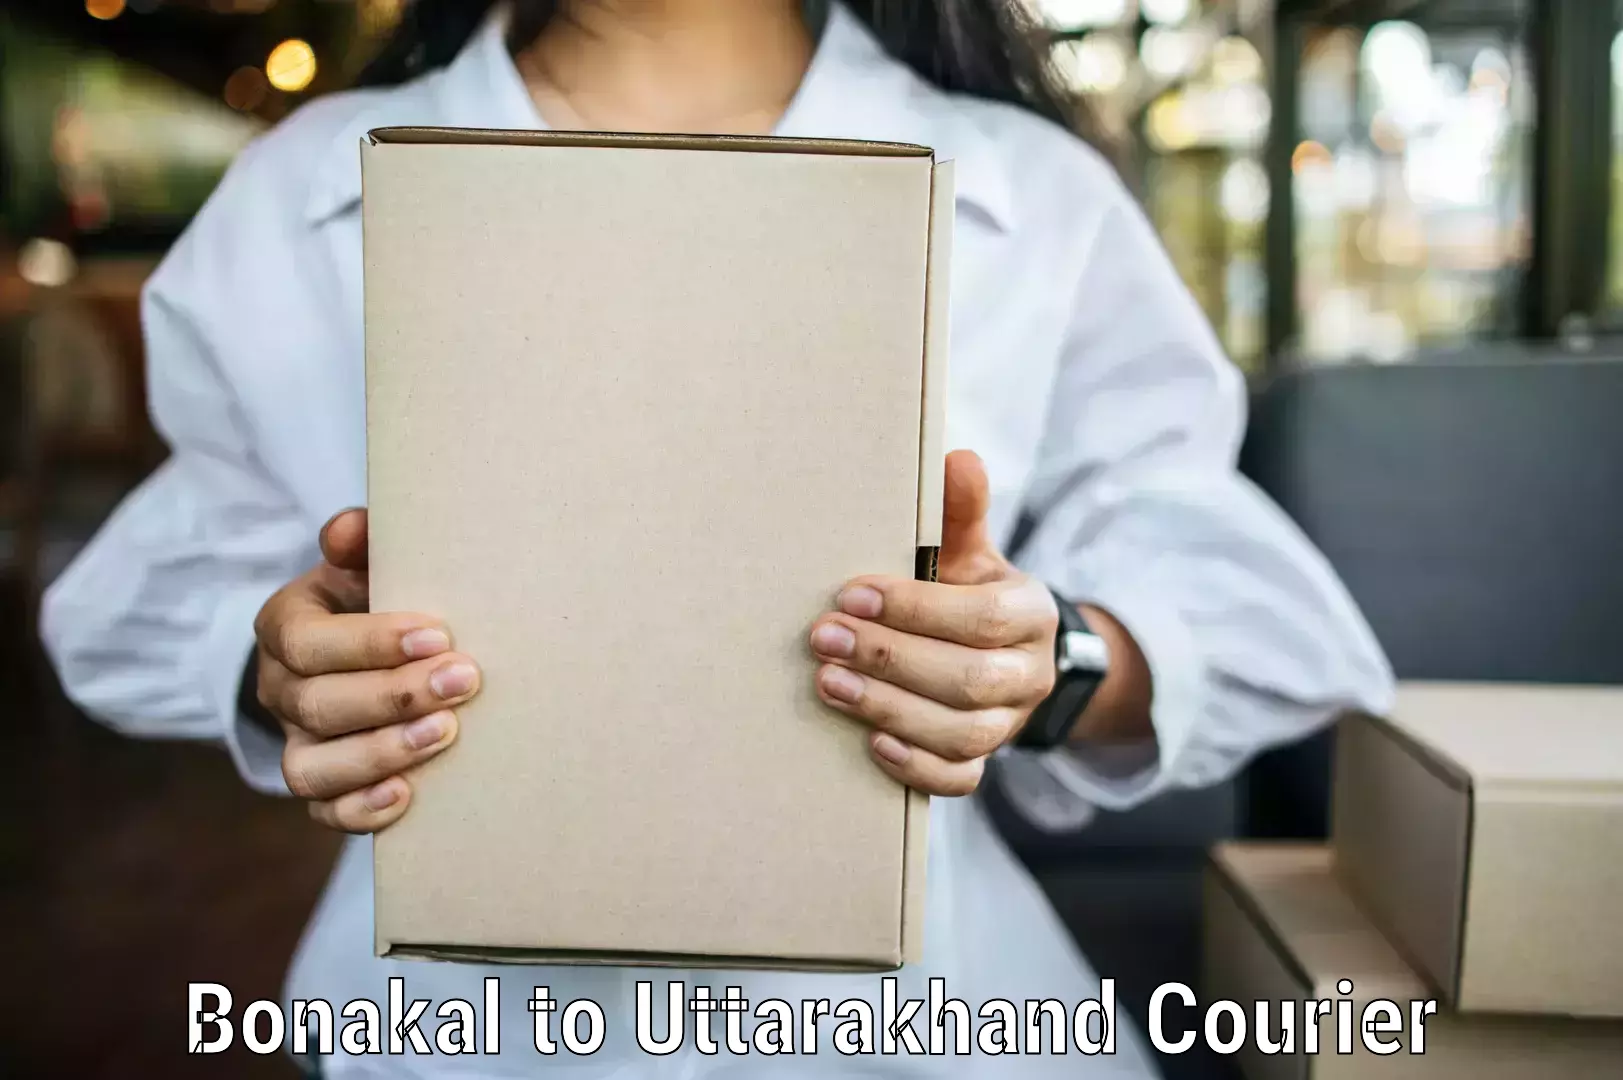 Flexible delivery schedules Bonakal to Pithoragarh